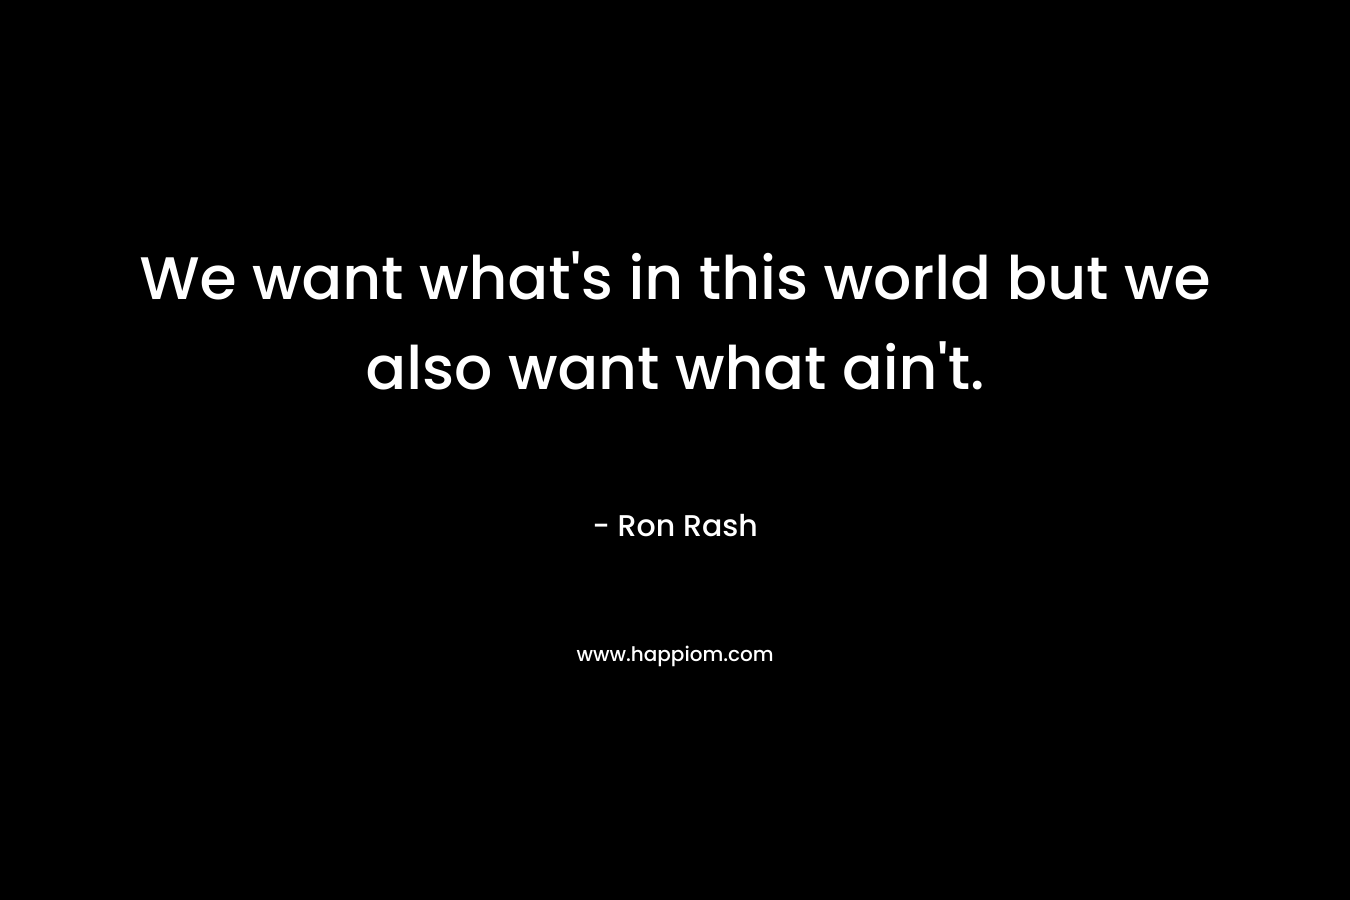 We want what’s in this world but we also want what ain’t. – Ron Rash